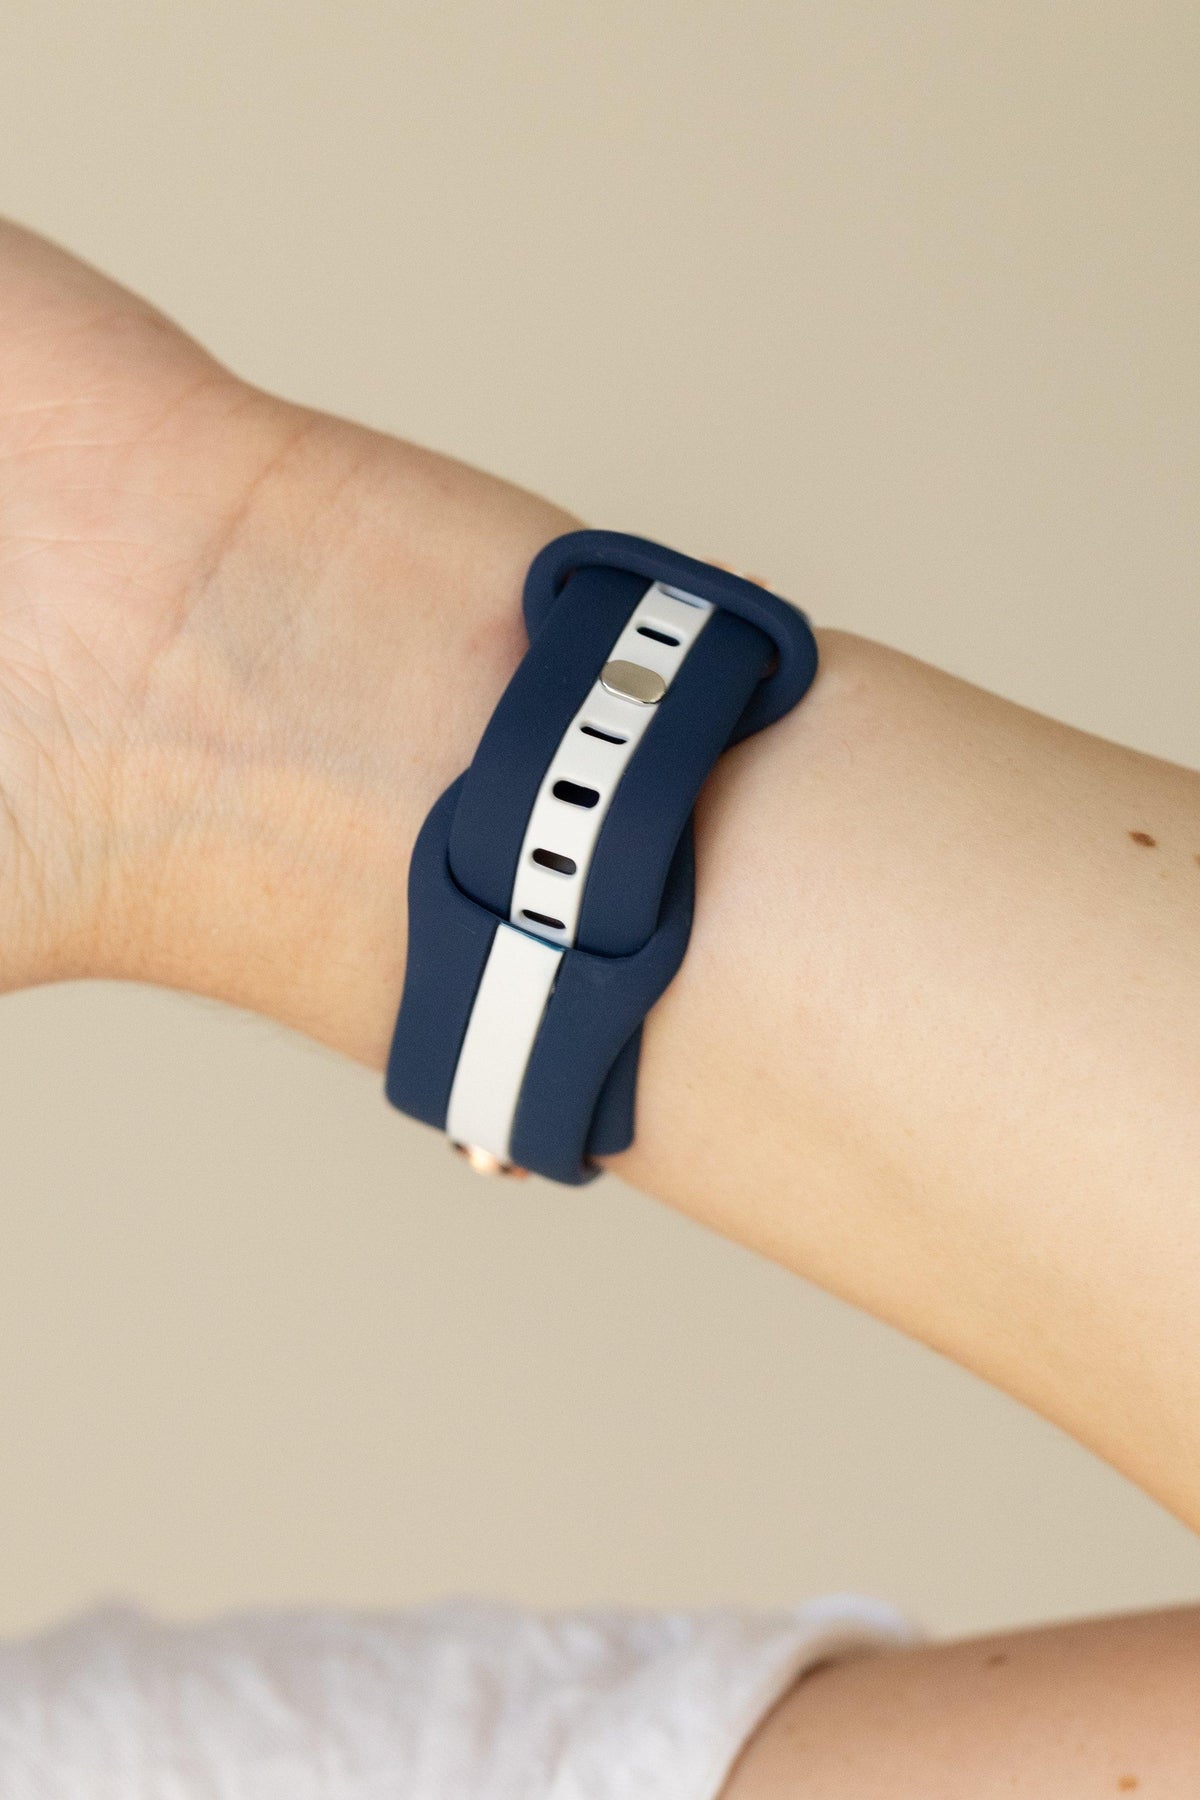 Navy Blue & White Apple WatchBand Football Fever Starting Line Up ‘23 - Strawberry Avocados